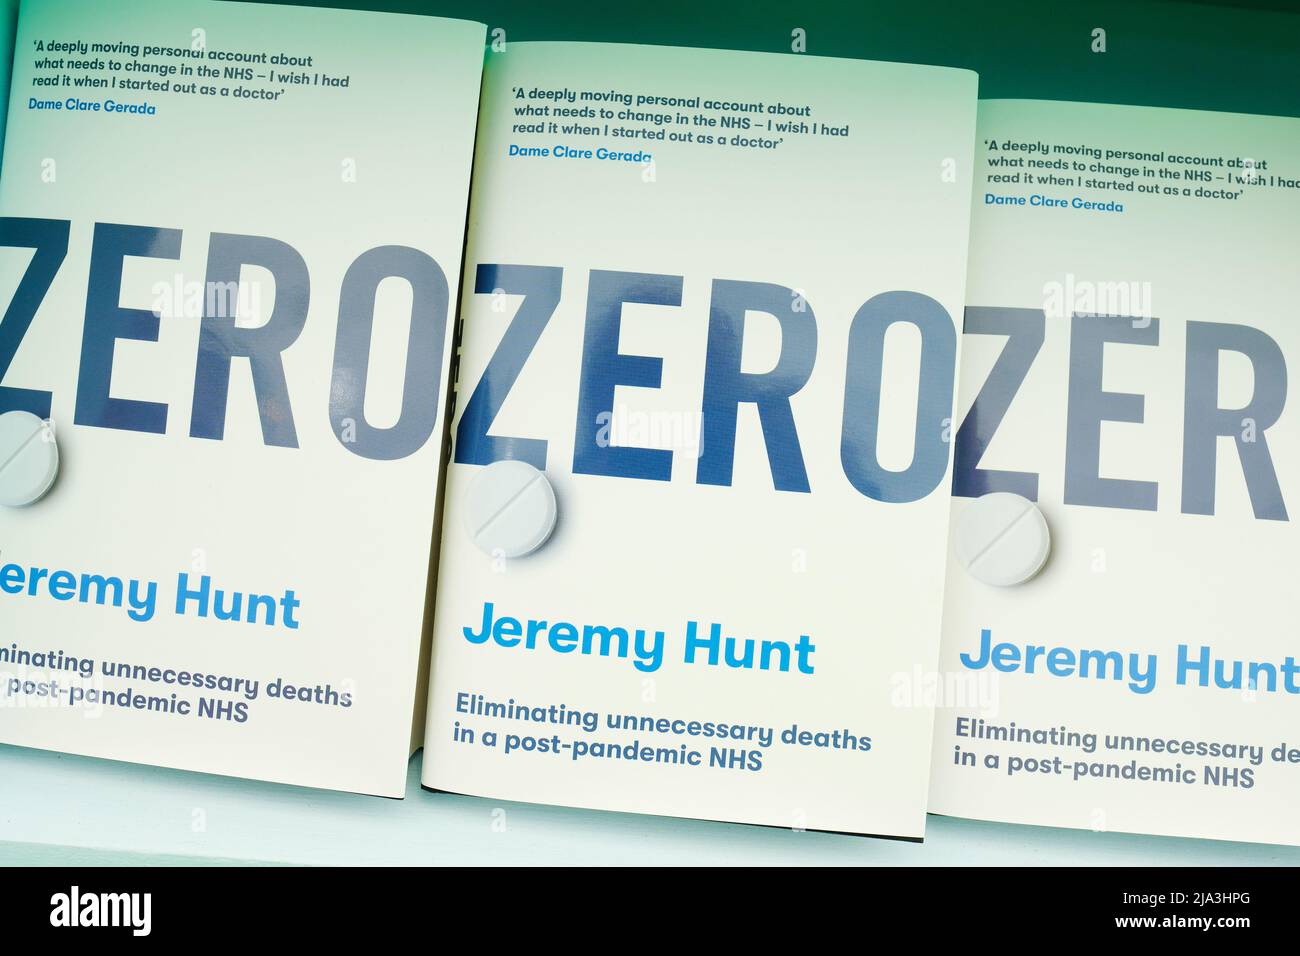 Jeremy Hunt book Zero about unnecessary death in the NHS - May 2022 Stock Photo